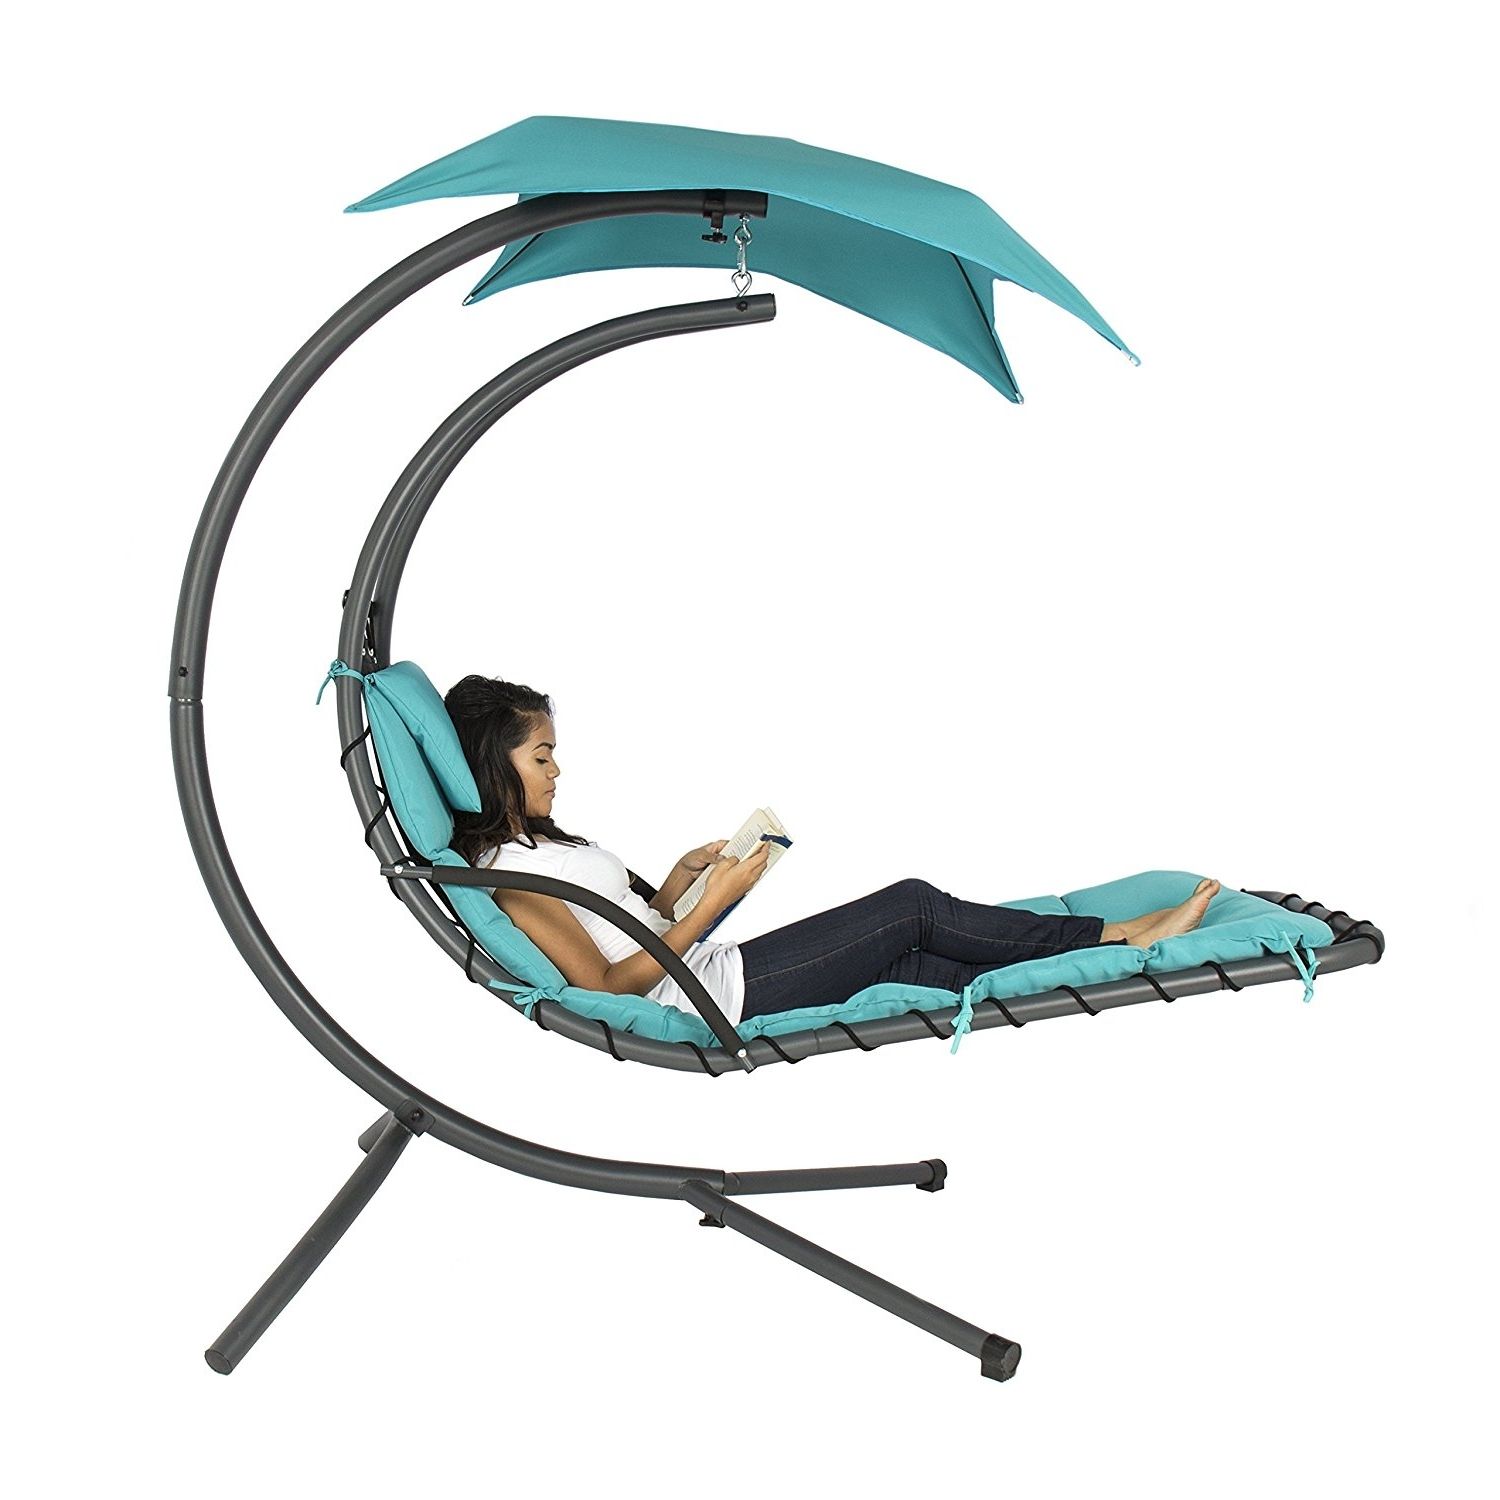 Best And Newest Amazon: Best Choice Products Hanging Chaise Lounger Chair Arc Regarding Chaise Lounge Swing Chairs (View 1 of 15)